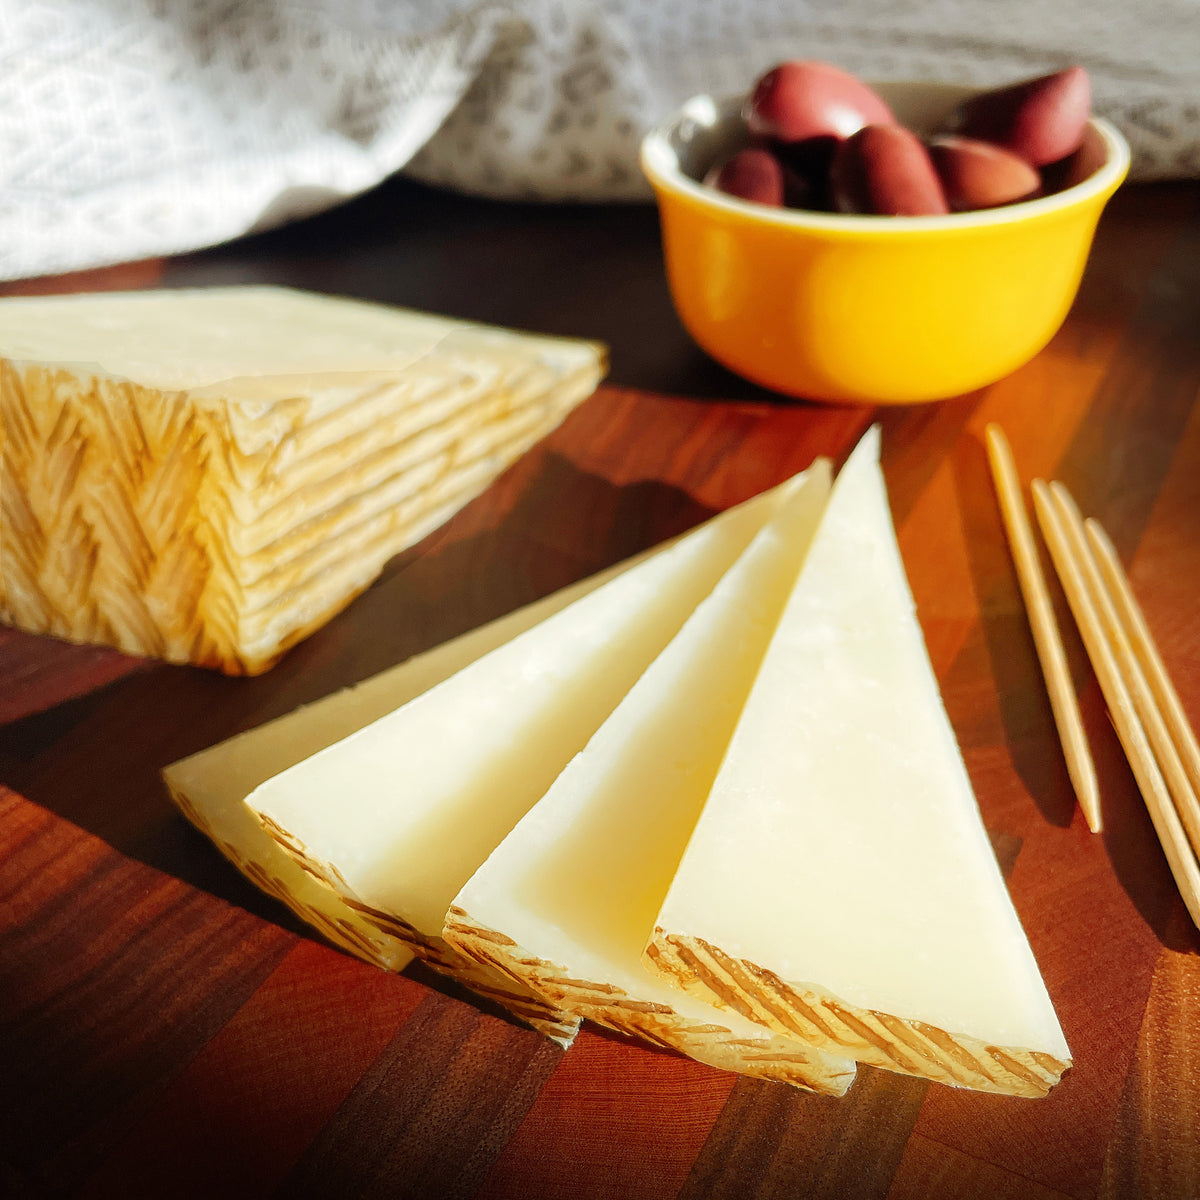 Manchego - a cheese with Protected Designation of Origin